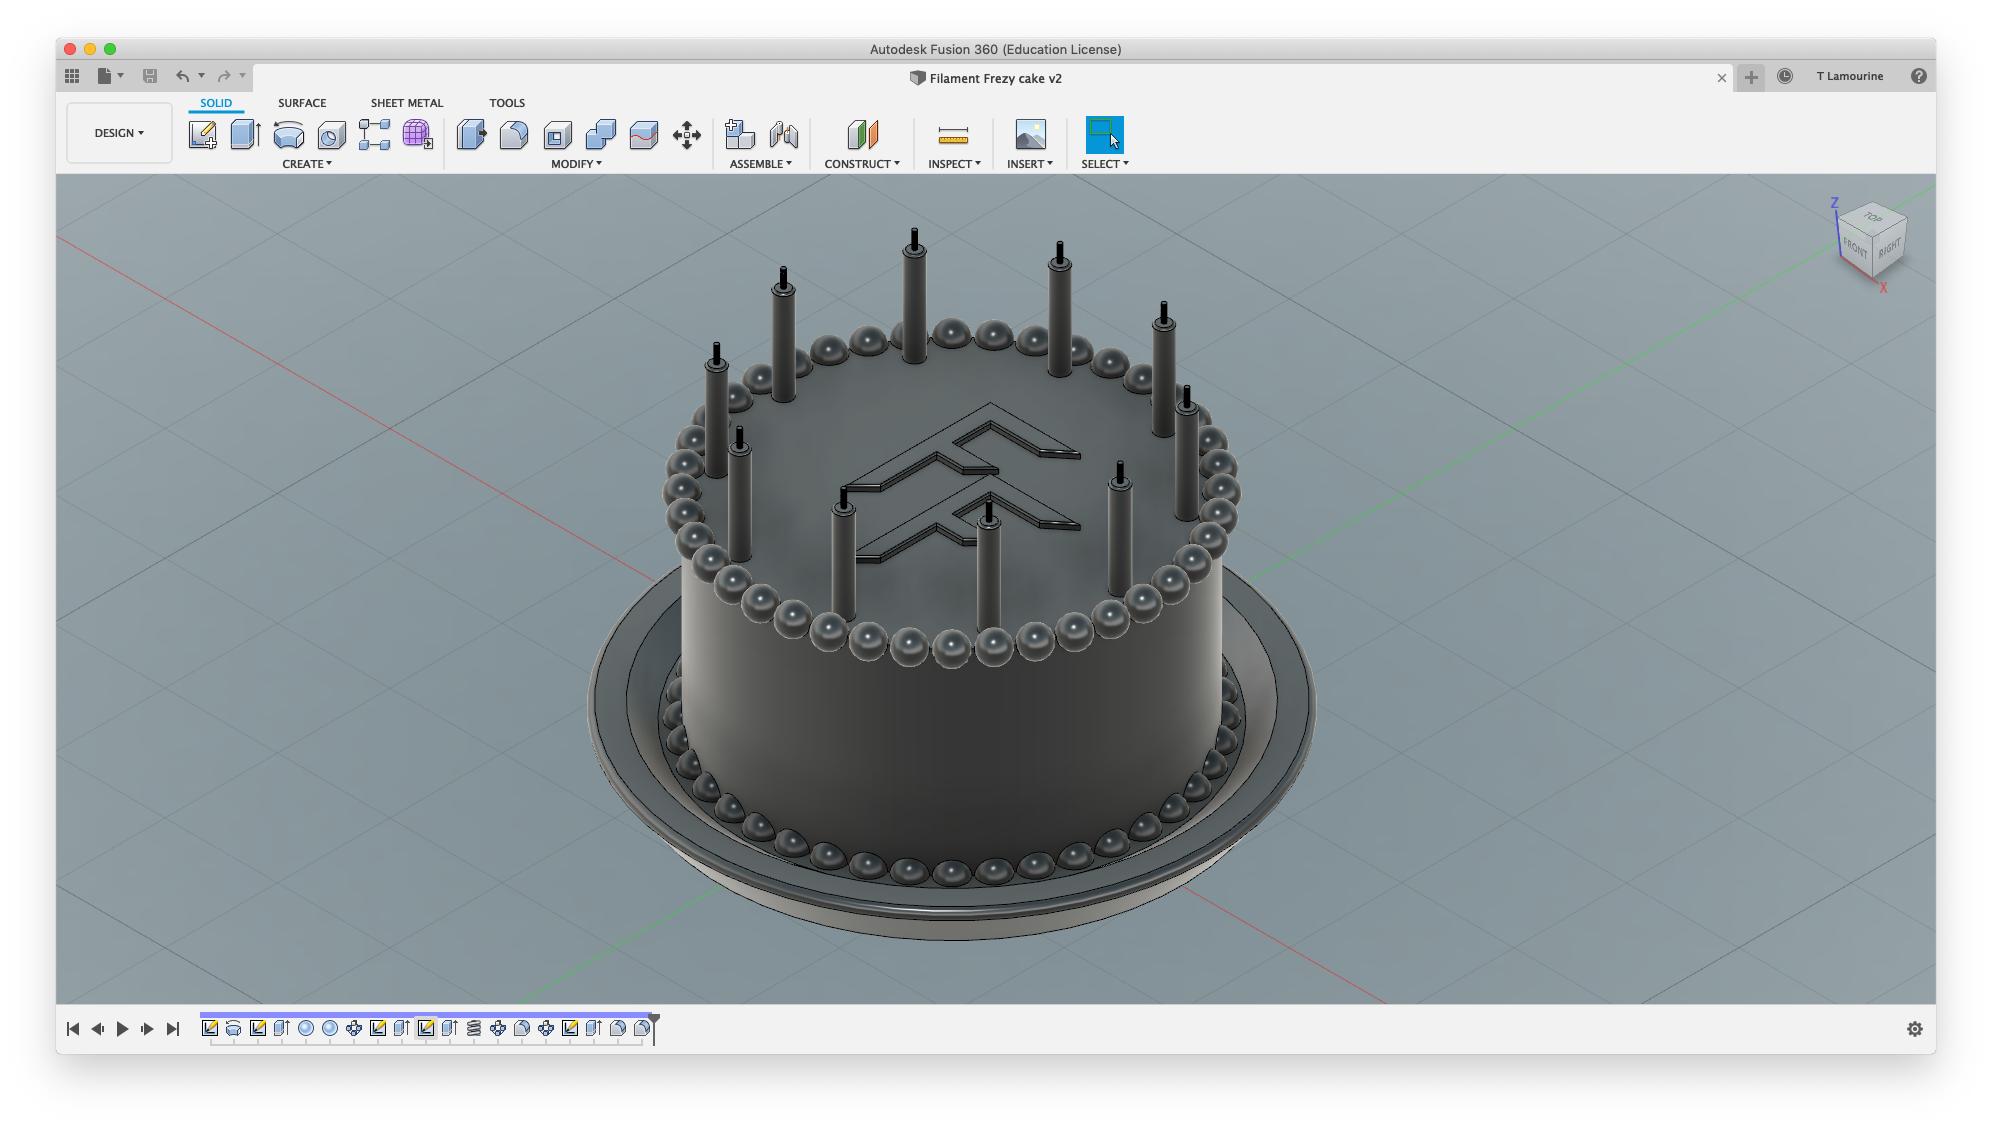 Birthday Cake- (Filament Frenzy) and blank Fusion file